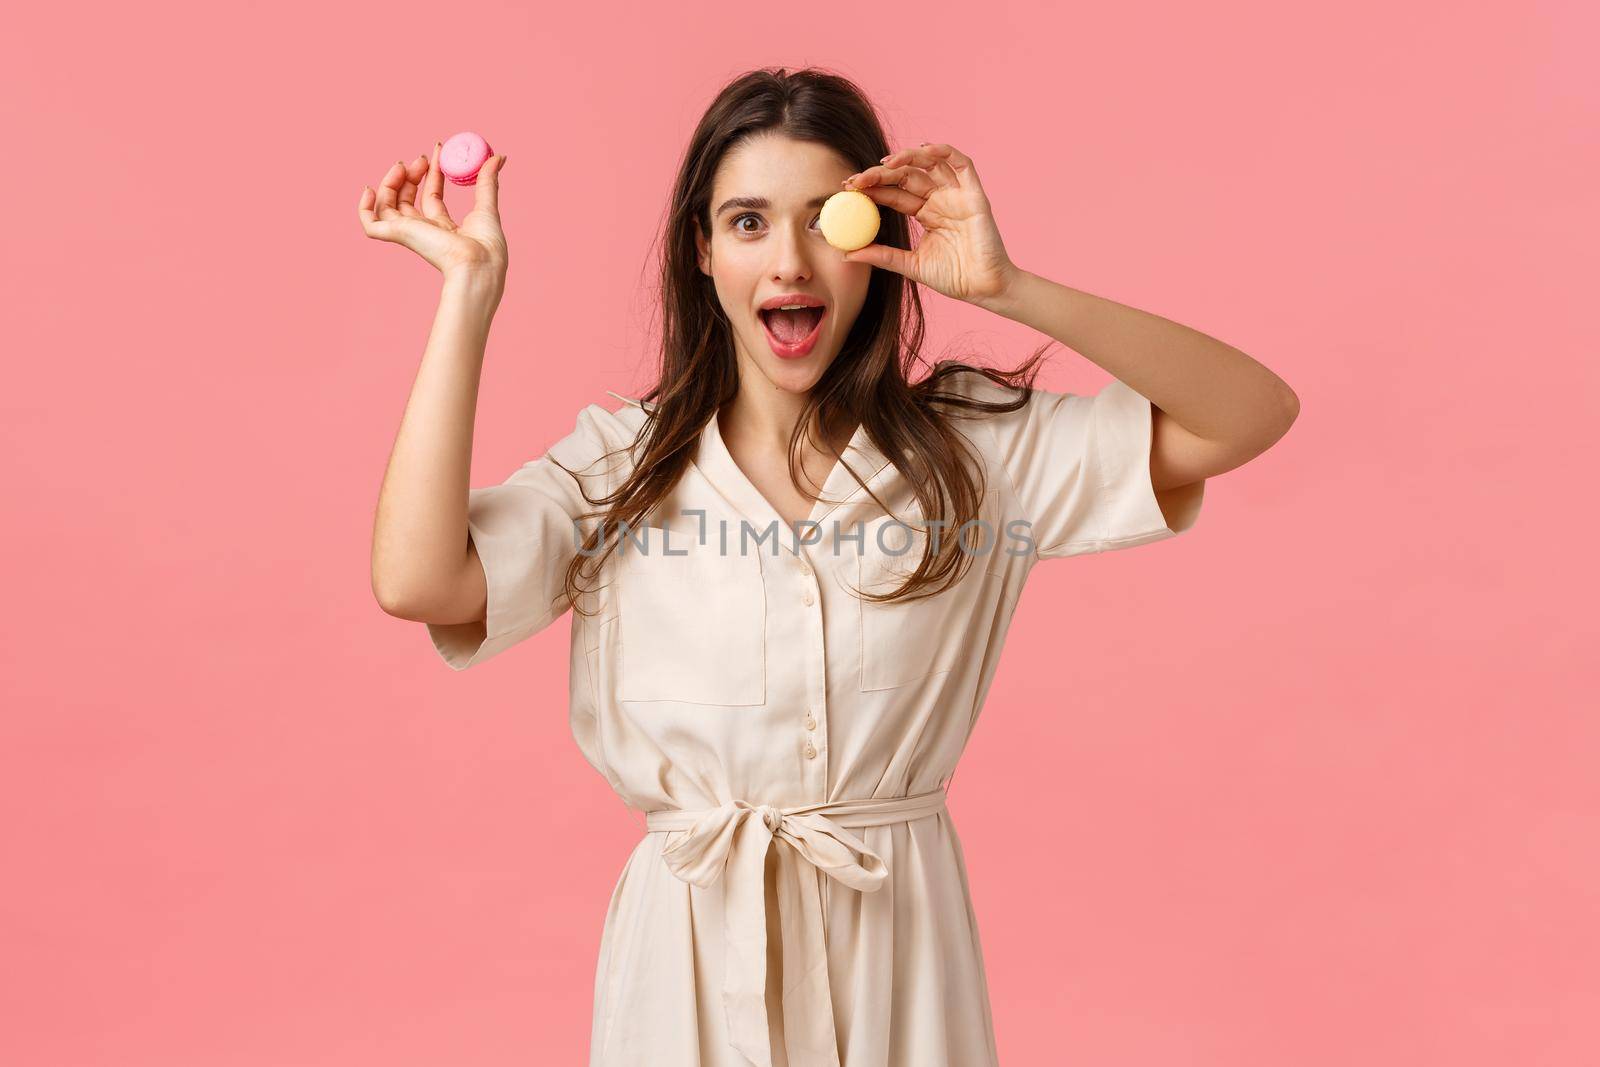 Excitement, holidays and sweet desserts concept. Elegant attractive young woman enjoy eating delicious food, holding macarons on on eye, open mouth gasping amused, standing pink background.